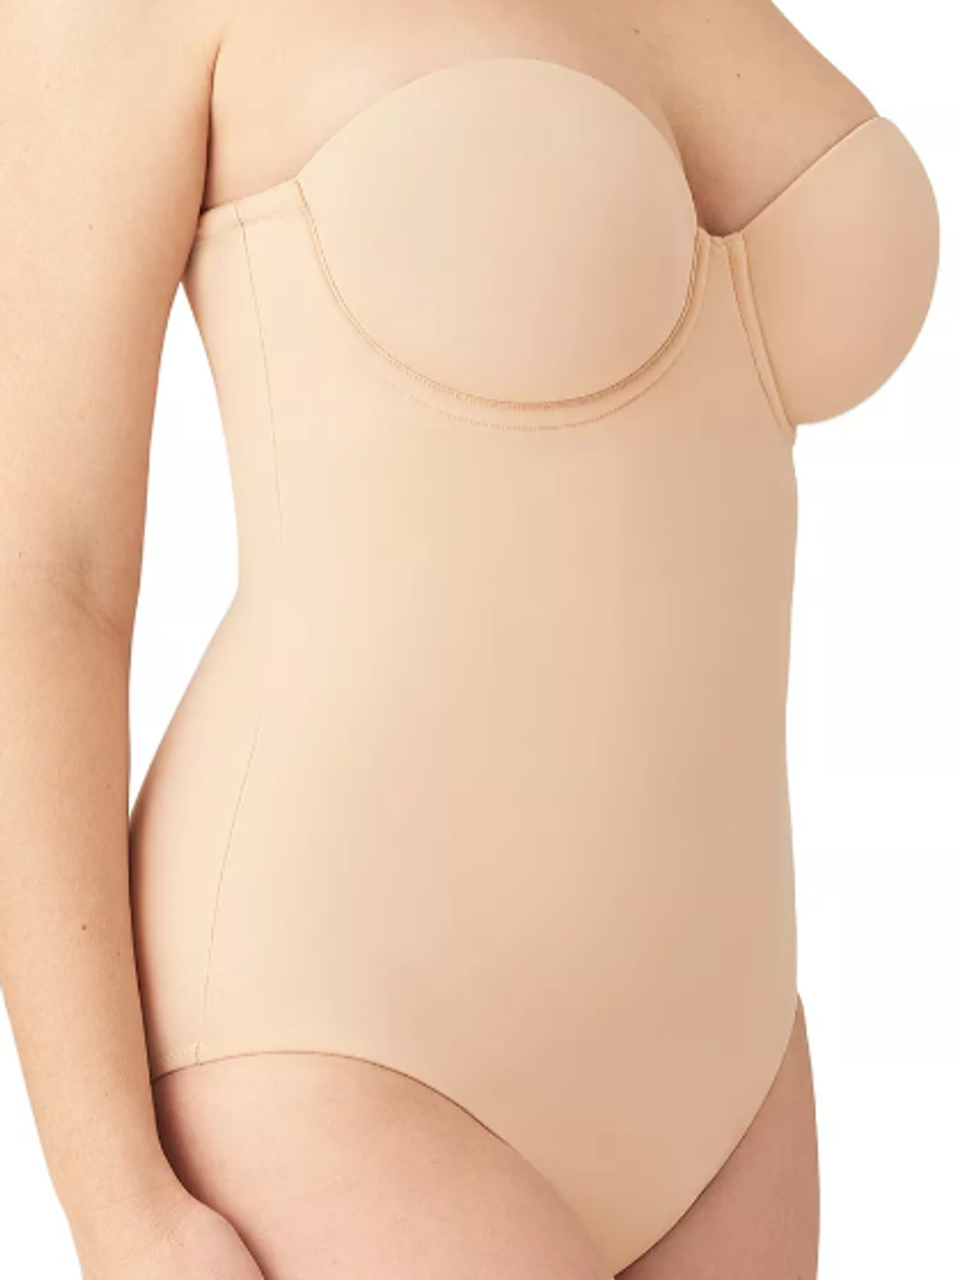 Wacoal Red Carpet Strapless Shaping Bodysuit in Natural Nude , Size 38G -  Bass River Shoes